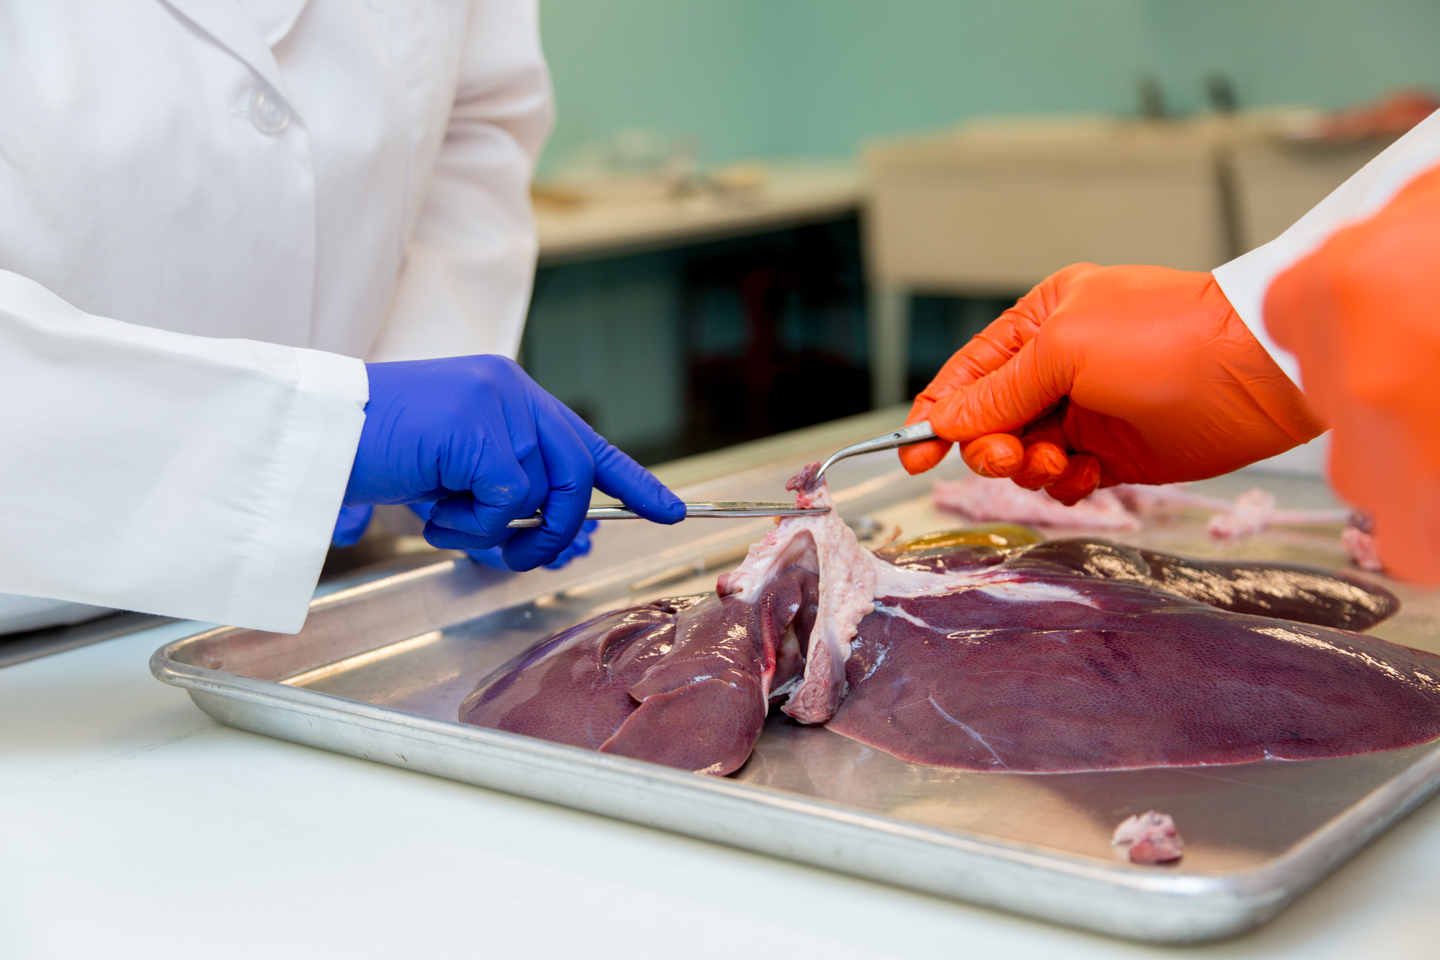 Dissection of animal organ for biomedical research at Animal biotech industries